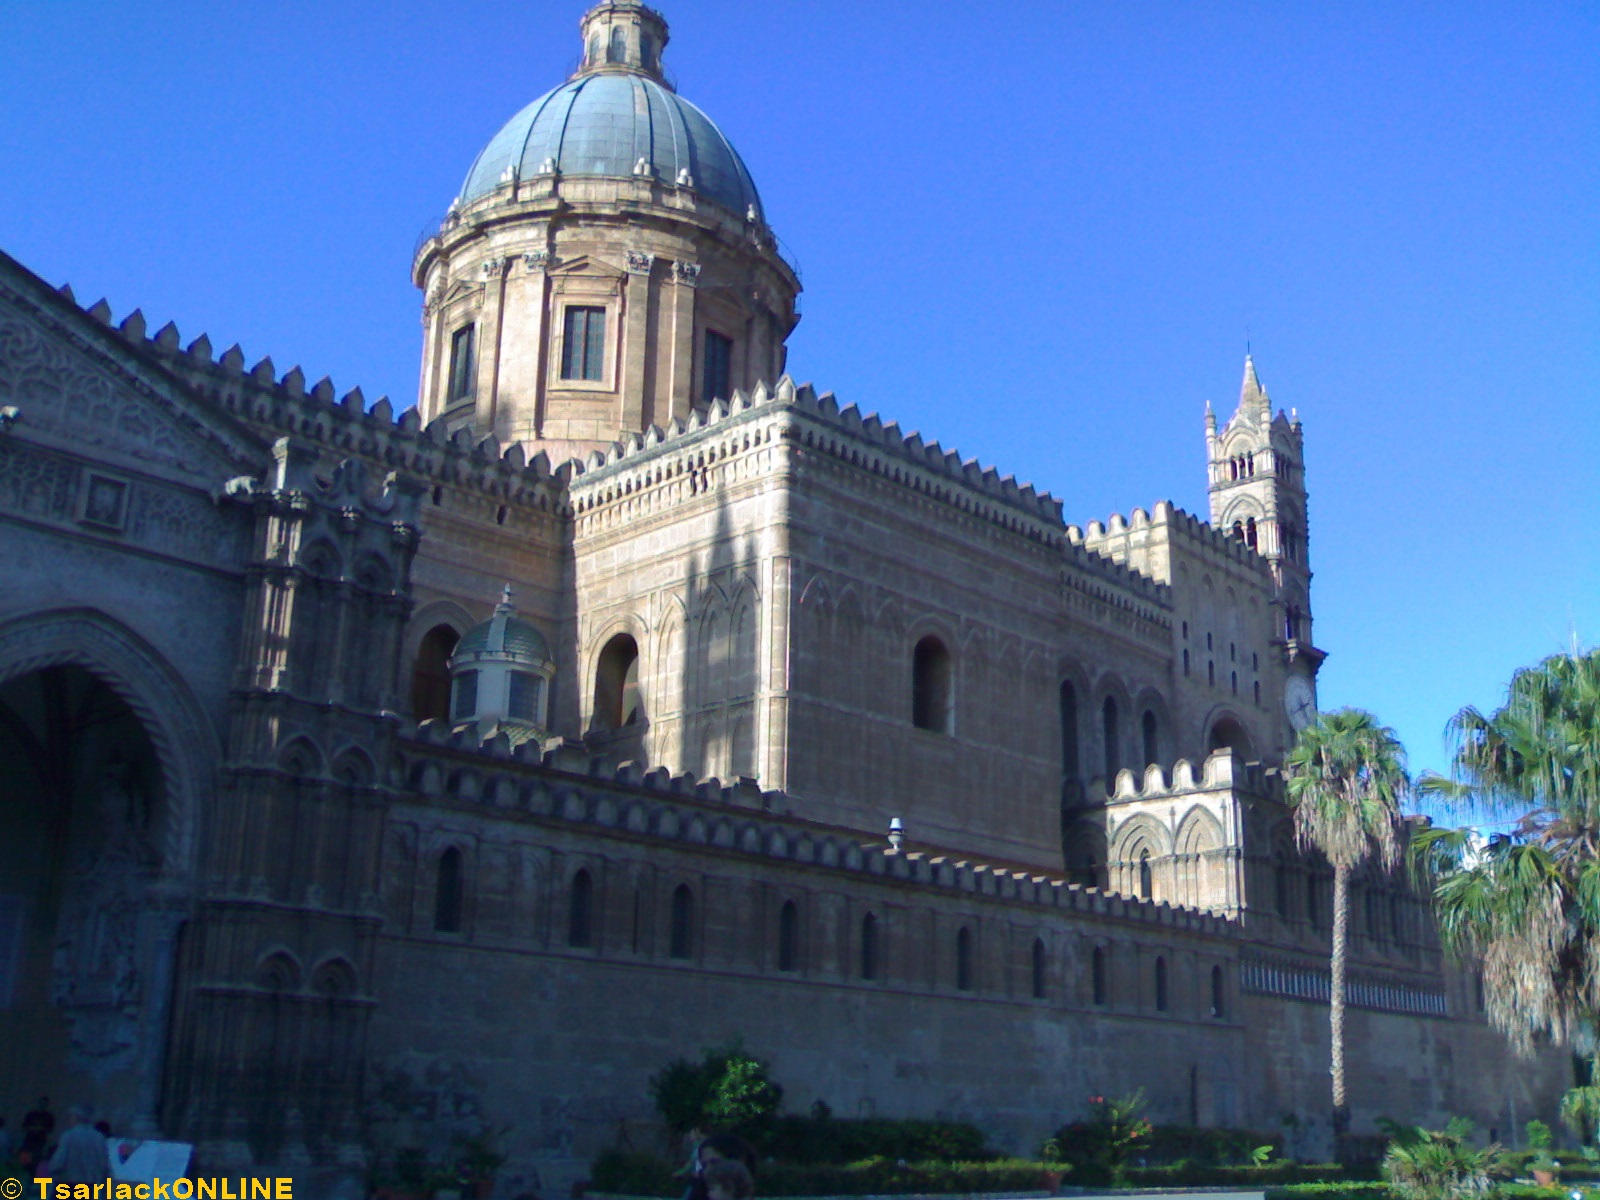 Tsarlackonline - Palermo Cathedral , HD Wallpaper & Backgrounds